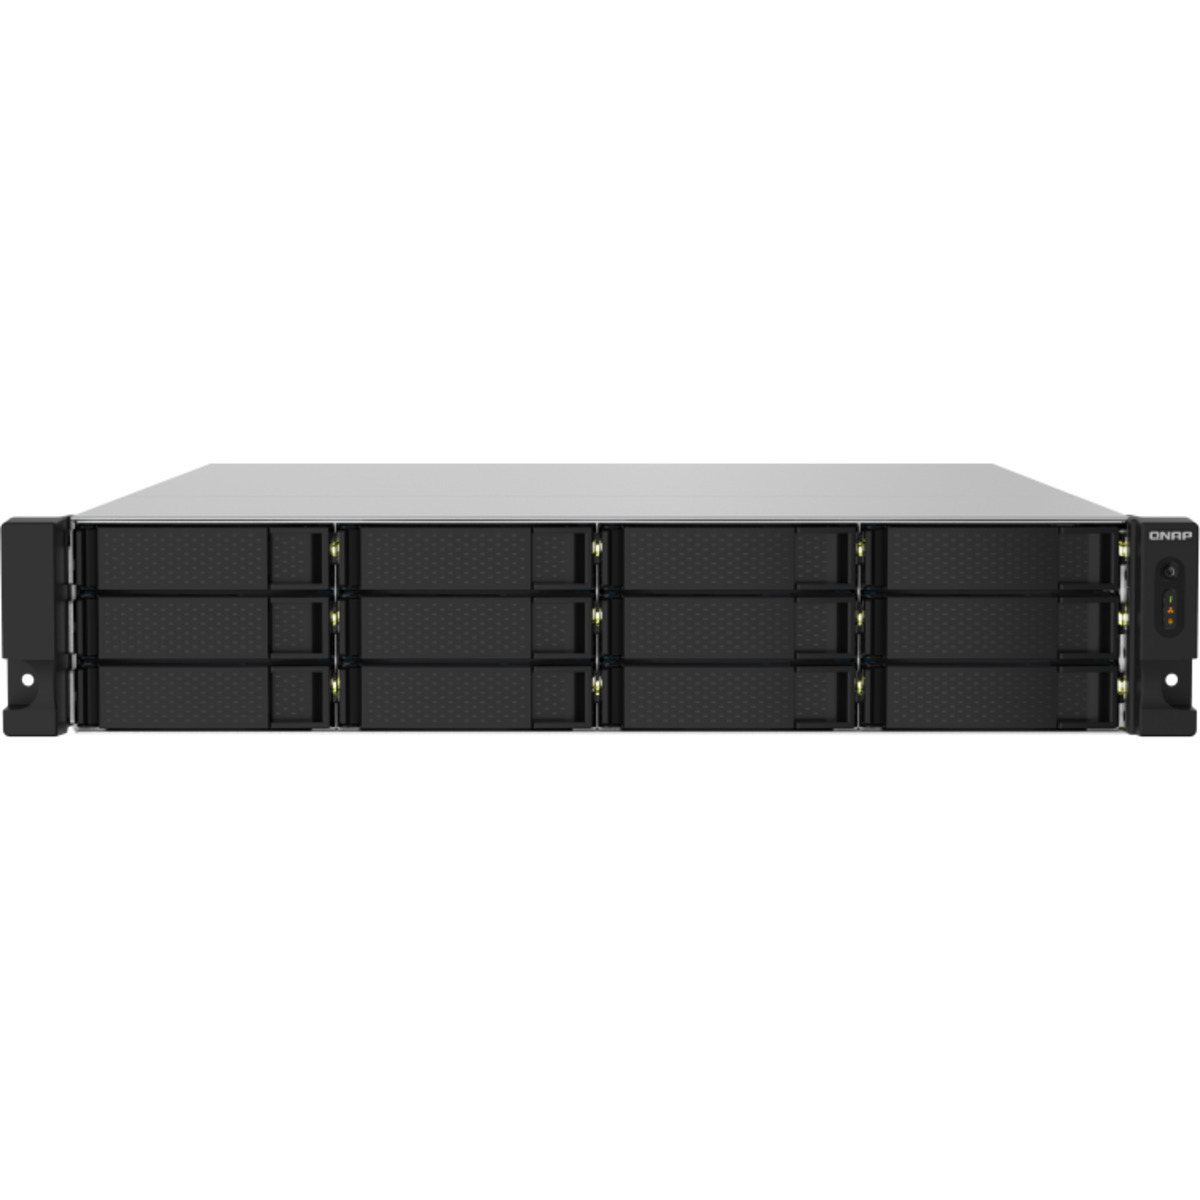 QNAP TS-1232PXU-RP 96tb 12-Bay RackMount Personal / Basic Home / Small Office NAS - Network Attached Storage Device 12x8tb Western Digital Ultrastar DC HC320 HUS728T8TALE6L4 3.5 7200rpm SATA 6Gb/s HDD ENTERPRISE Class Drives Installed - Burn-In Tested - FREE RAM UPGRADE TS-1232PXU-RP